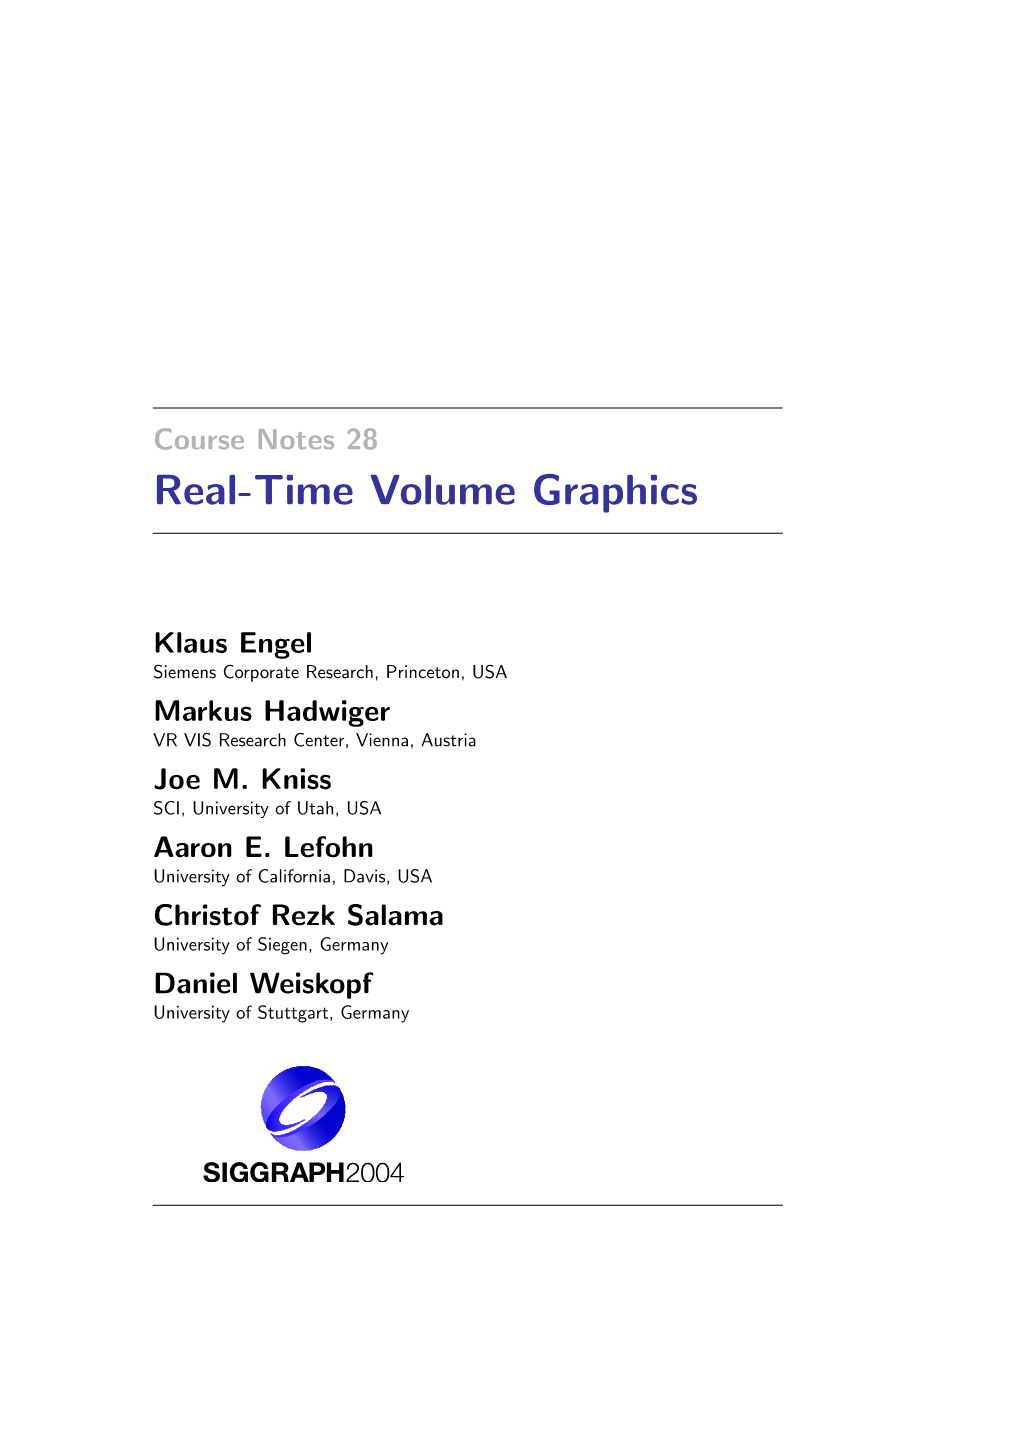 Course Notes 28 Real-Time Volume Graphics